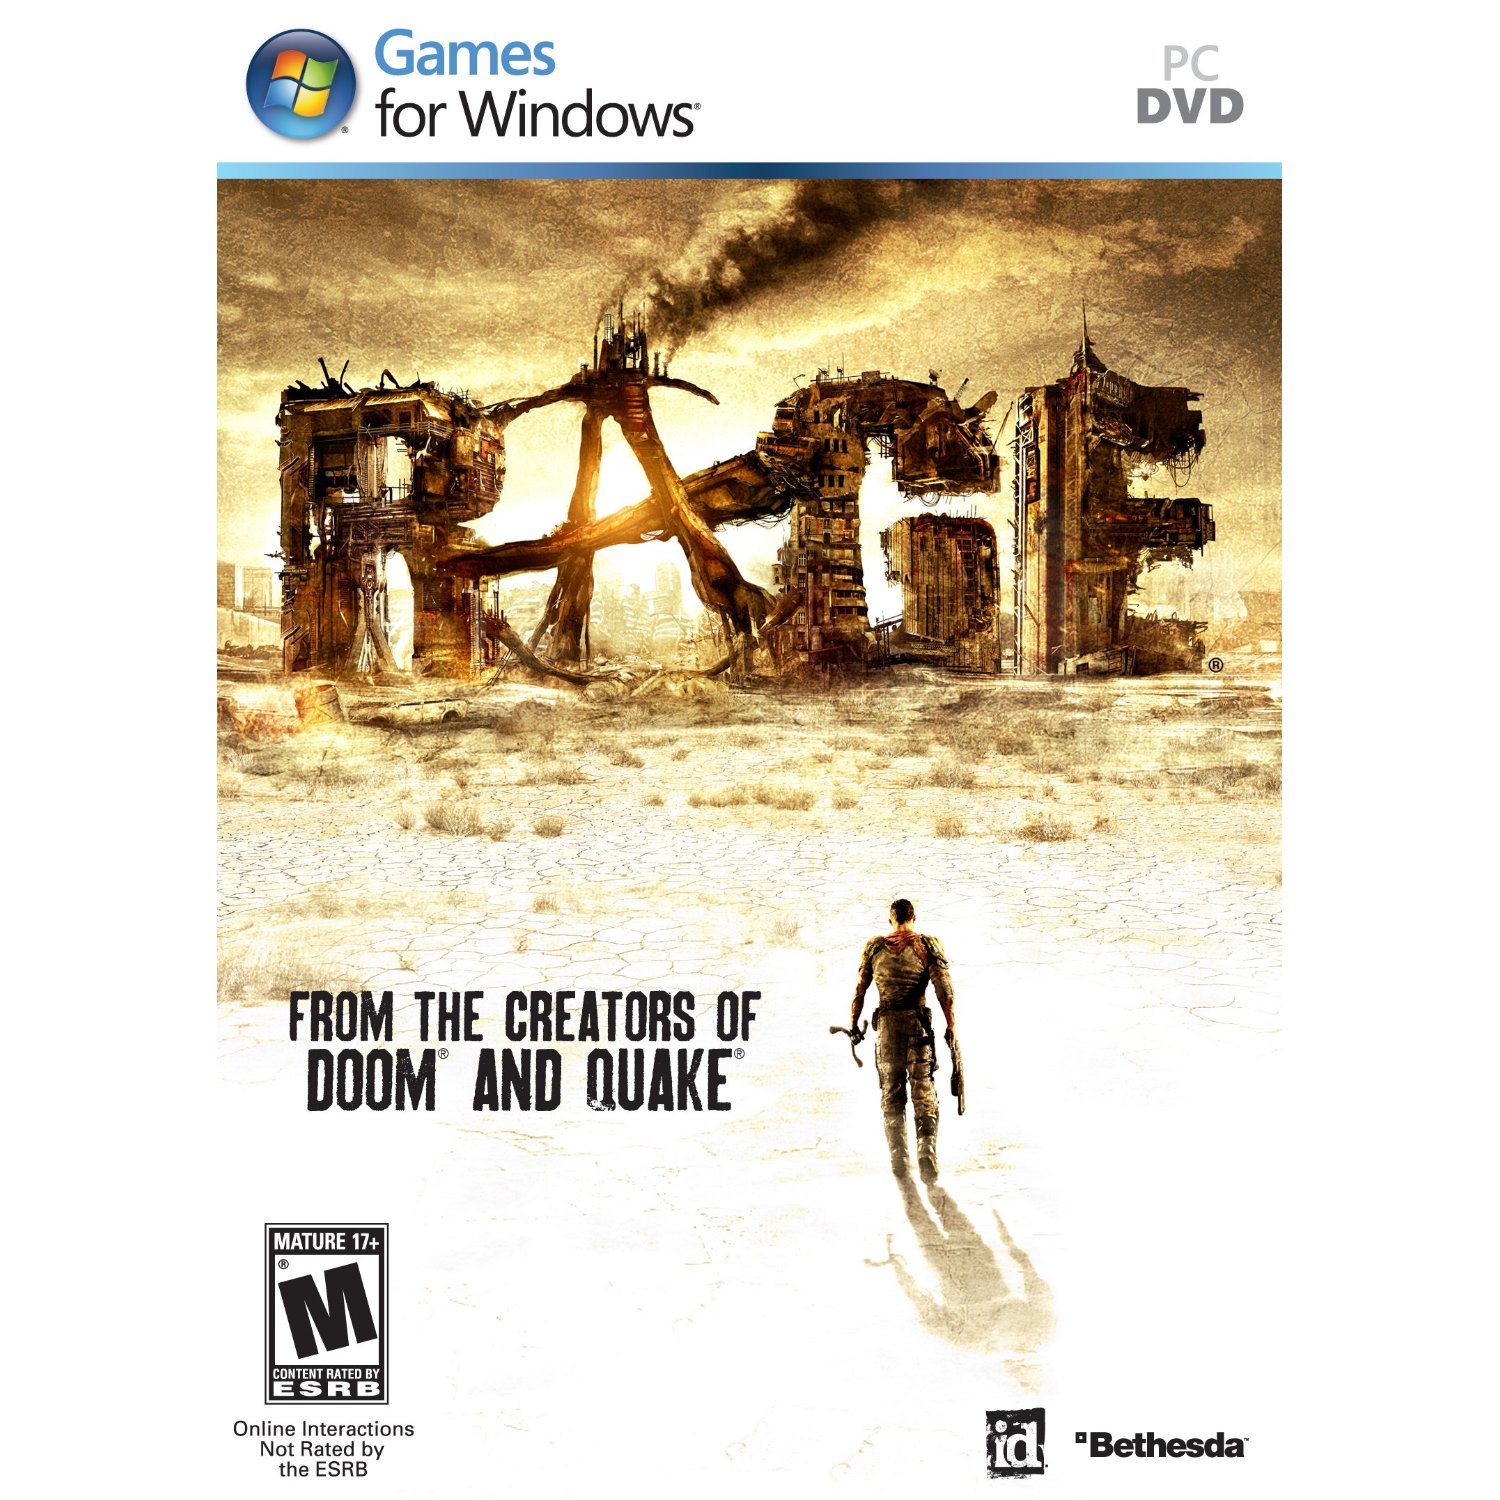 http://thetechjournal.com/wp-content/uploads/images/1110/1317651895-rage--pc-game-review--1.jpg